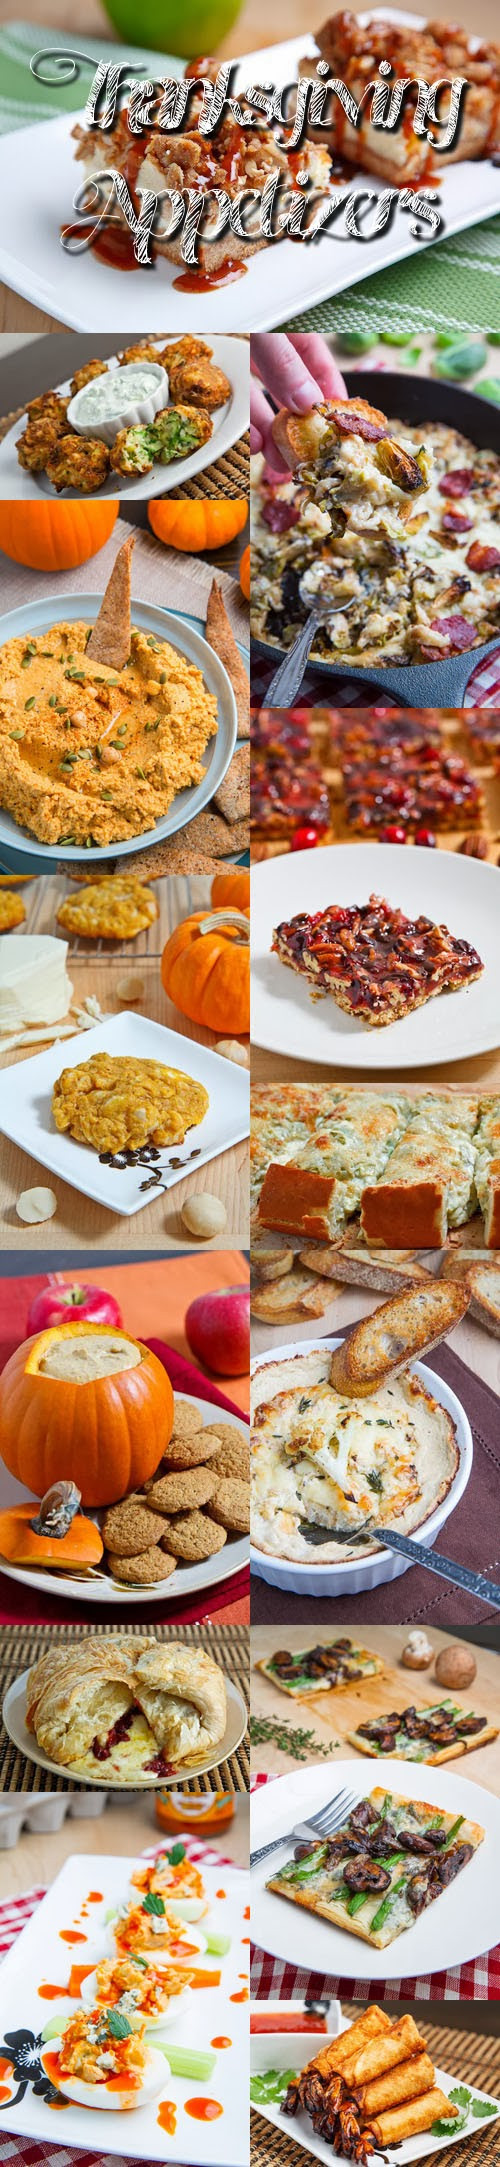 Great Thanksgiving Appetizers
 Thanksgiving Appetizer Recipes on Closet Cooking